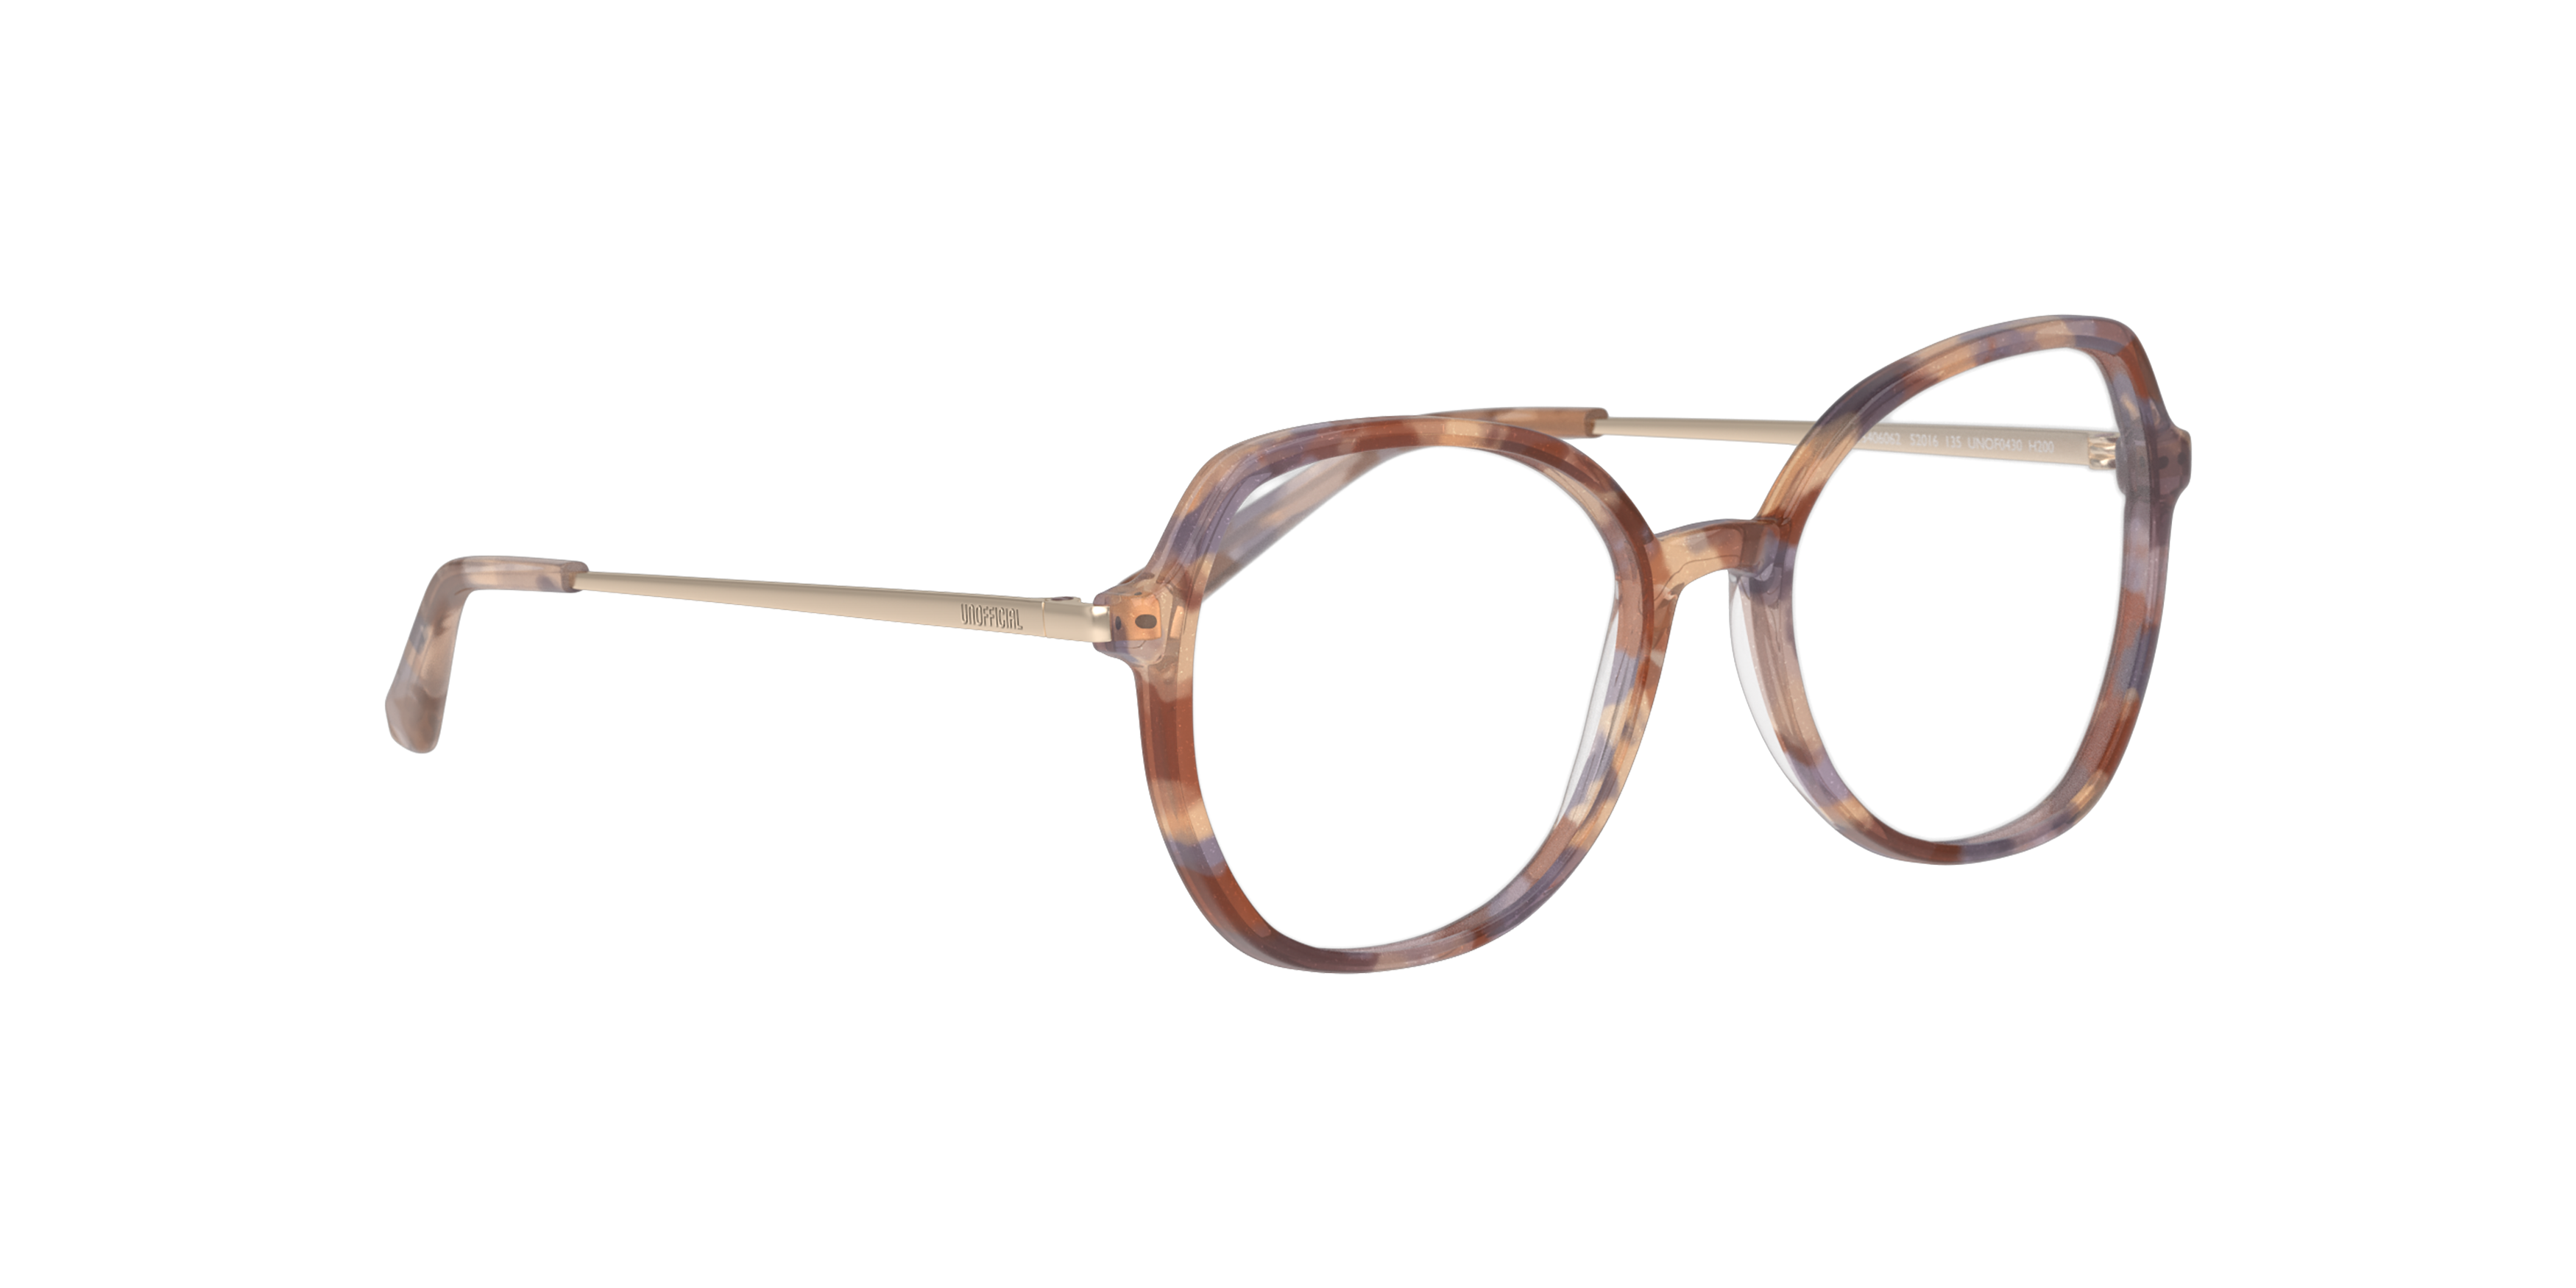 Angle_Right01 Unofficial UNOF0430 (VD00) Glasses Transparent / Brown